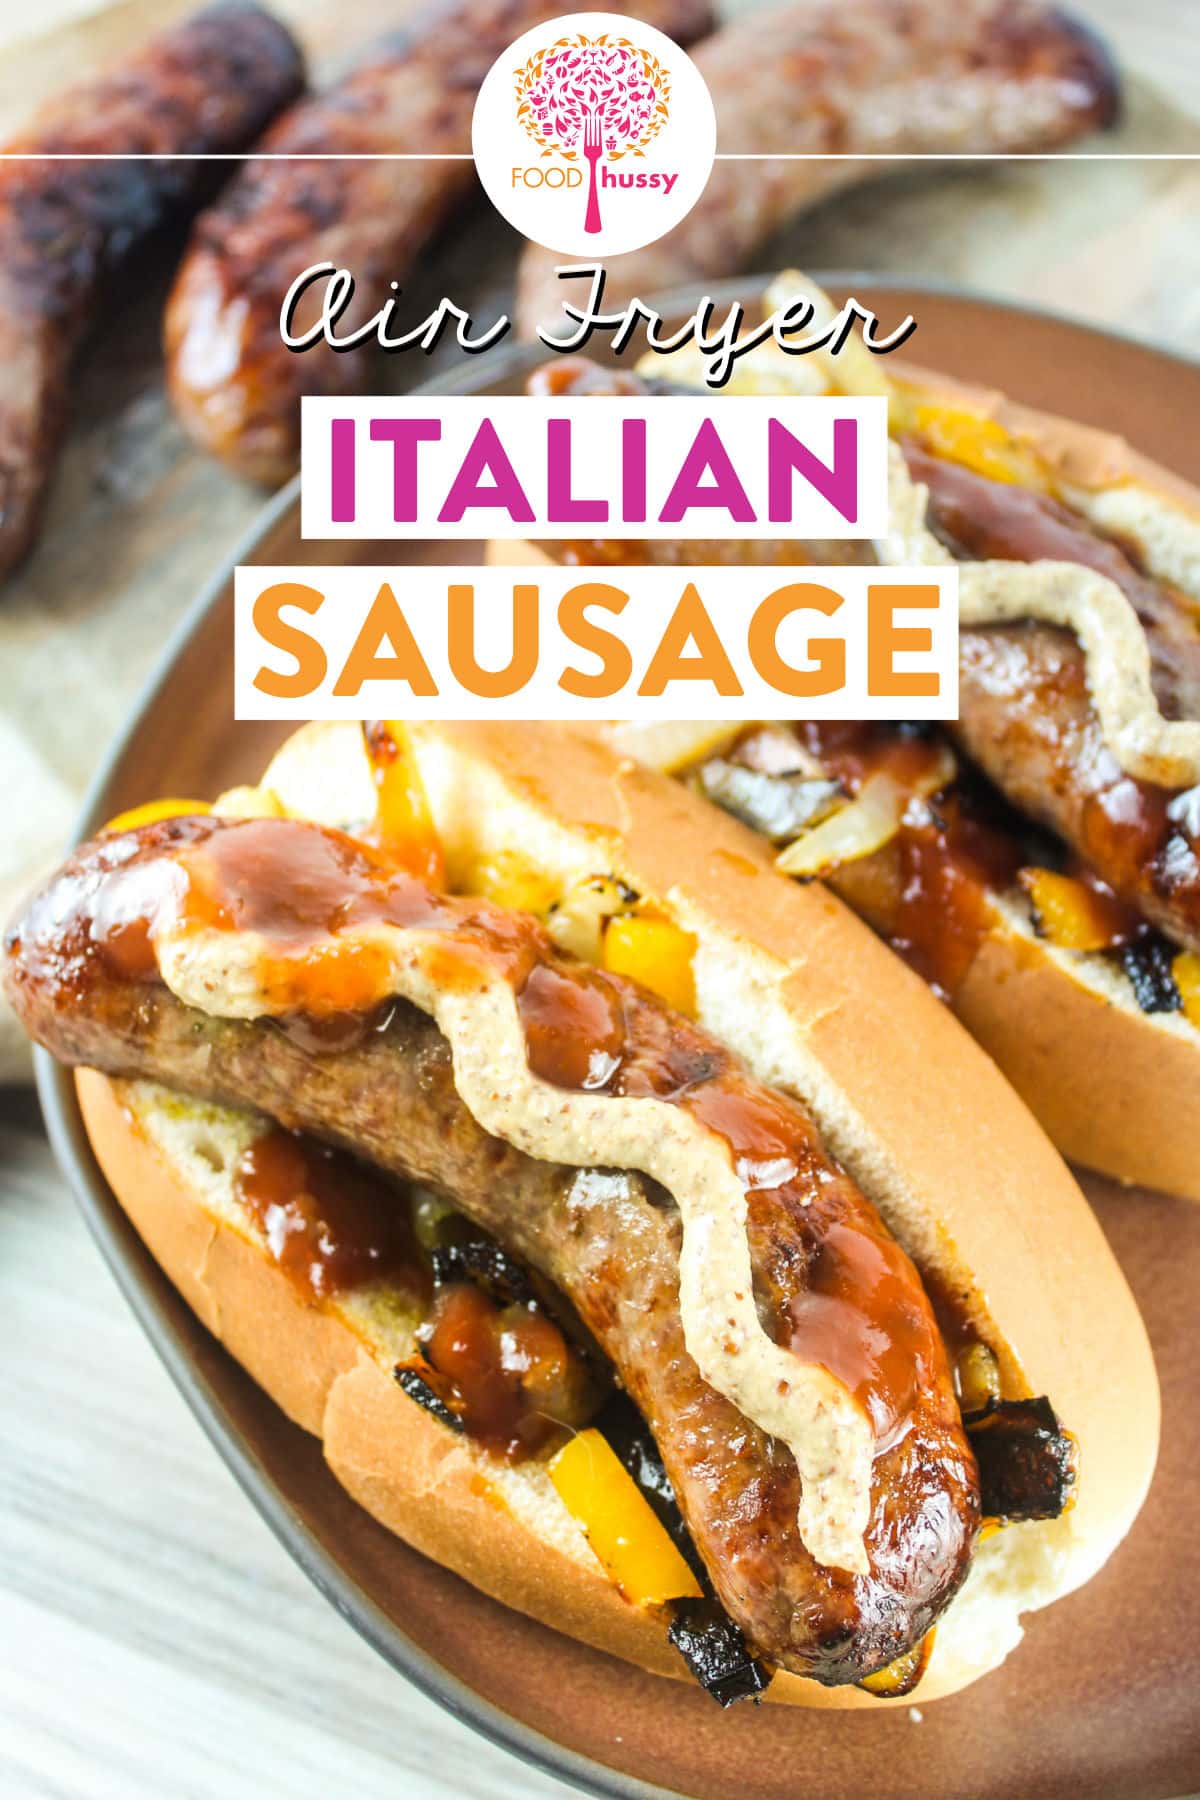 Air Fryer Italian Sausage is a quick and easy dinner that makes perfect sausages every time! Whether you're eating them on a bun, over pasta or in a stir fry - these air fryer sausages will make a delicious dinner! via @foodhussy